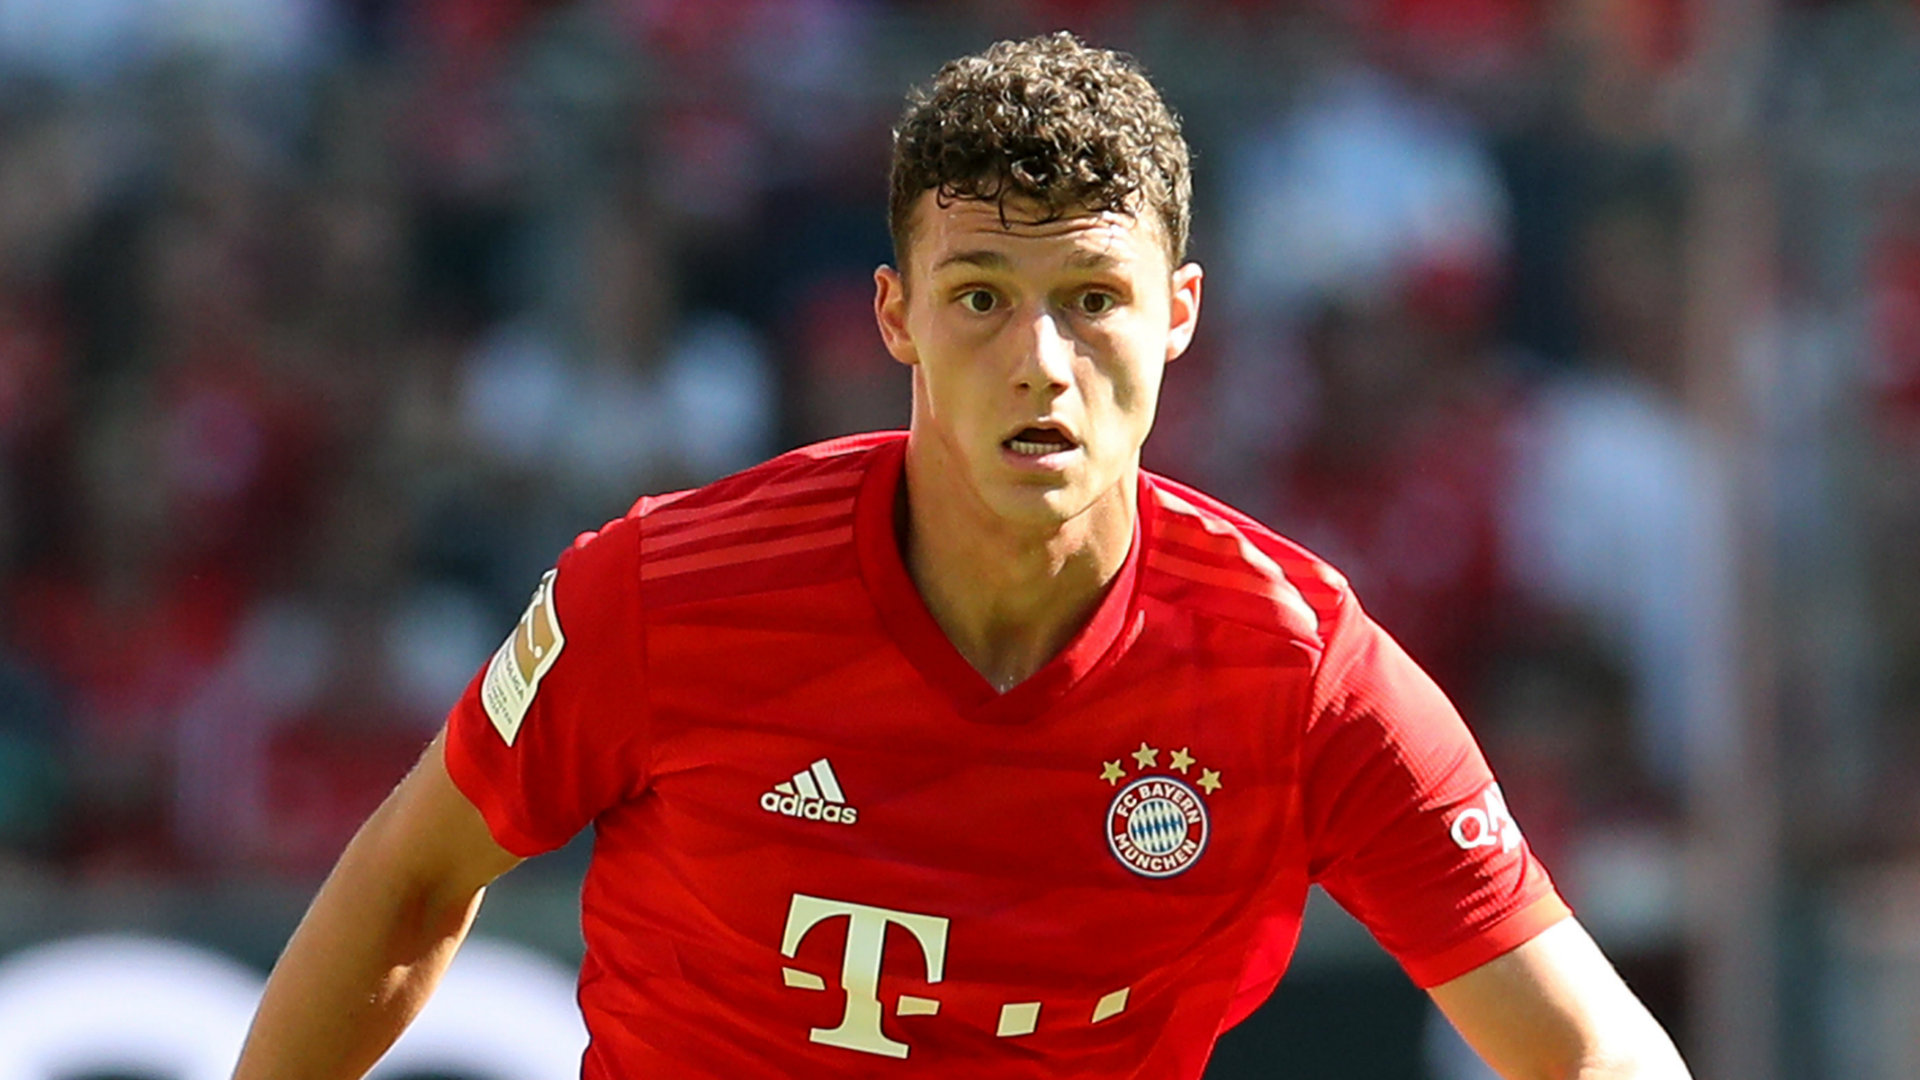 Pavard : Bayern Munich News Benjamin Pavard Will Be One Of Bundesliga Champions Greatest Ever Signings According To President Uli Hoeness Goal Com - Benjamin pavard, latest news & rumours, player profile, detailed statistics, career details and transfer information for the fc bayern münchen player, powered by goal.com.